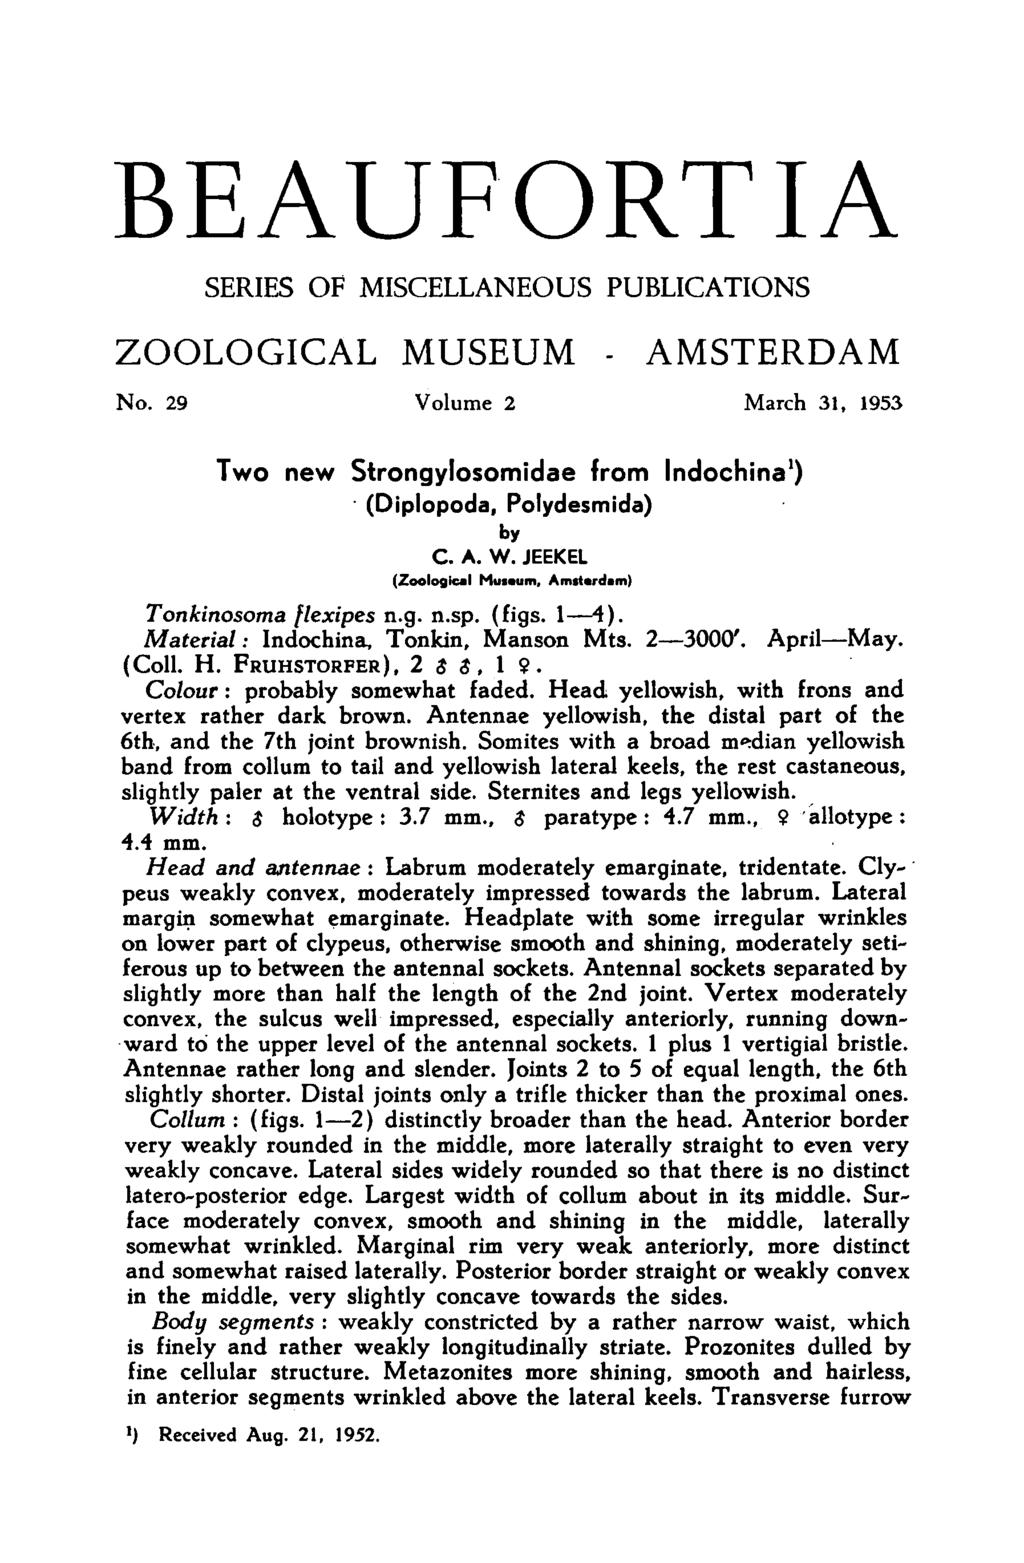 Beaufortia SERIES OF MISCELLANEOUS PUBLICATIONS ZOOLOGICAL MUSEUM - AMSTERDAM No. 29 Volume 2 March 31, 1953 Two new Strongylosomidae from Indochina (Diplopoda, Polydesmida) by C.A.W.